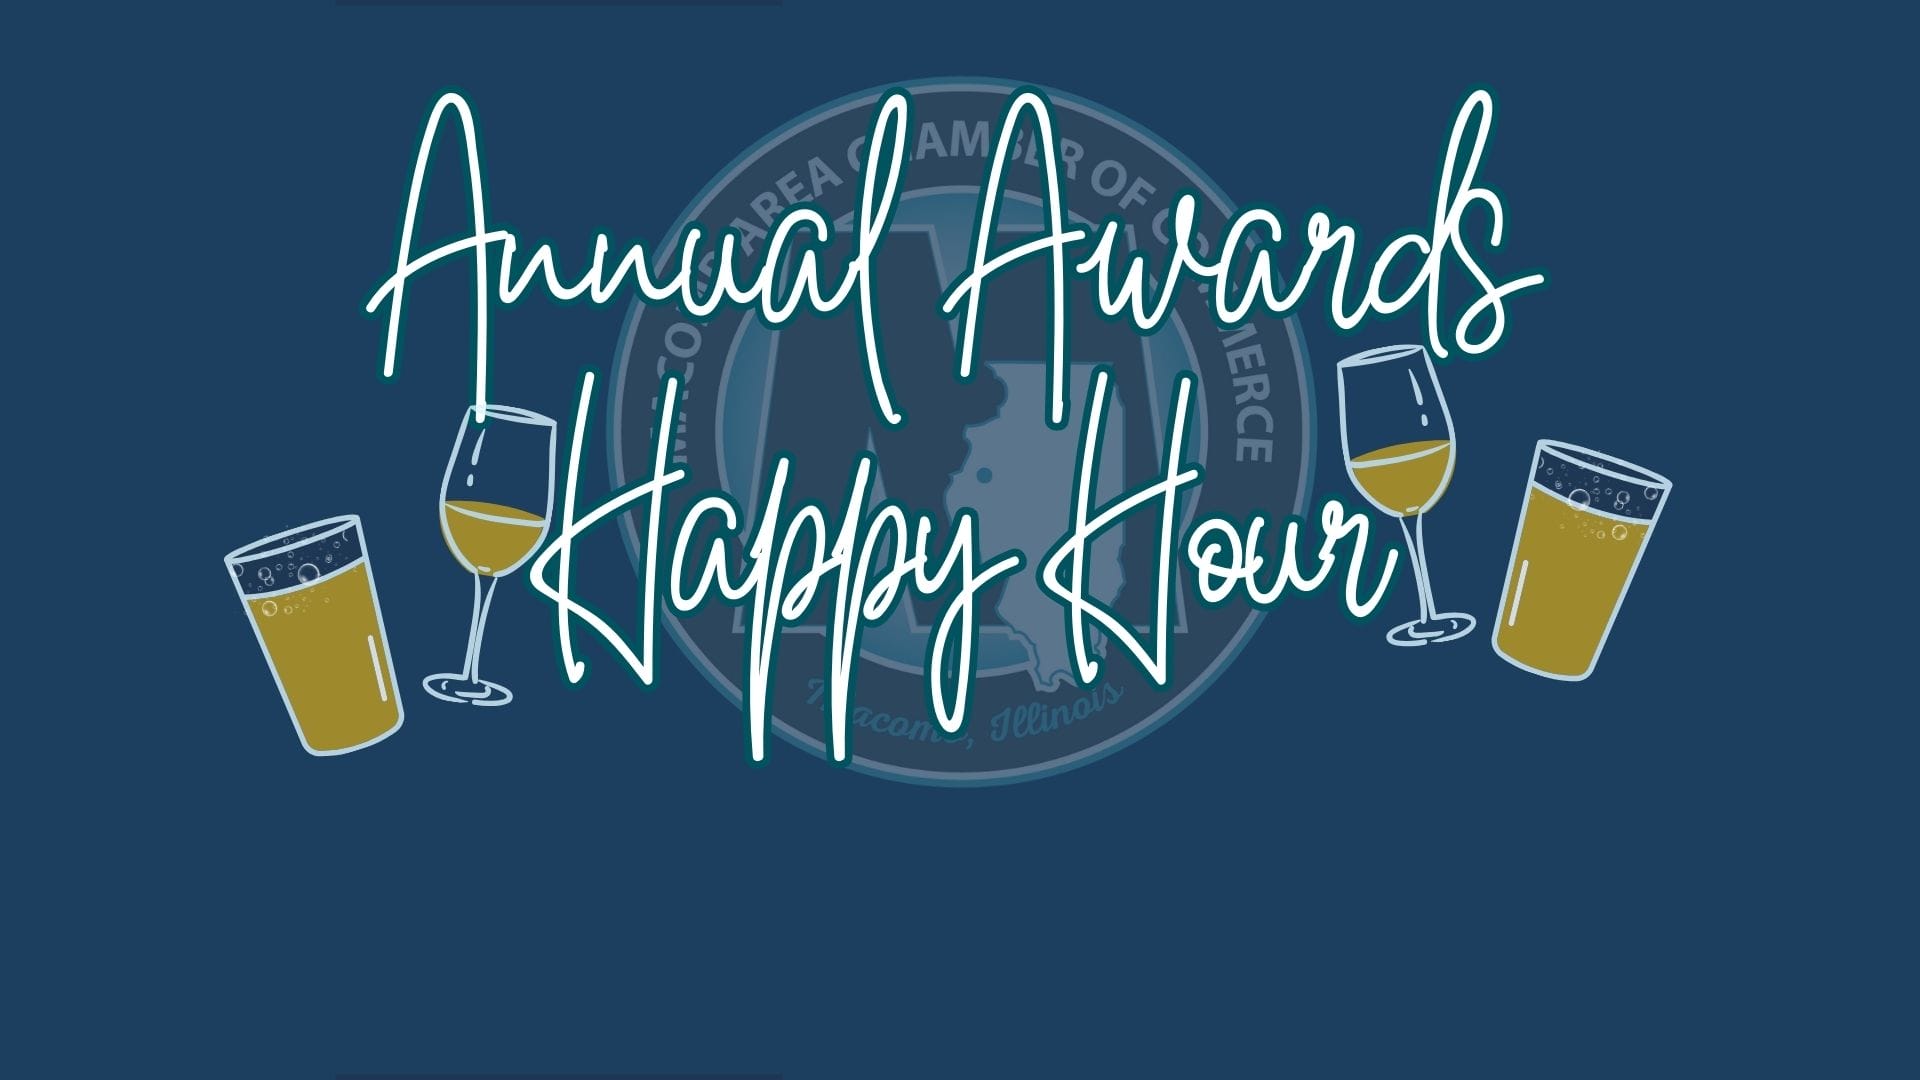 Annual Awards FB Cover